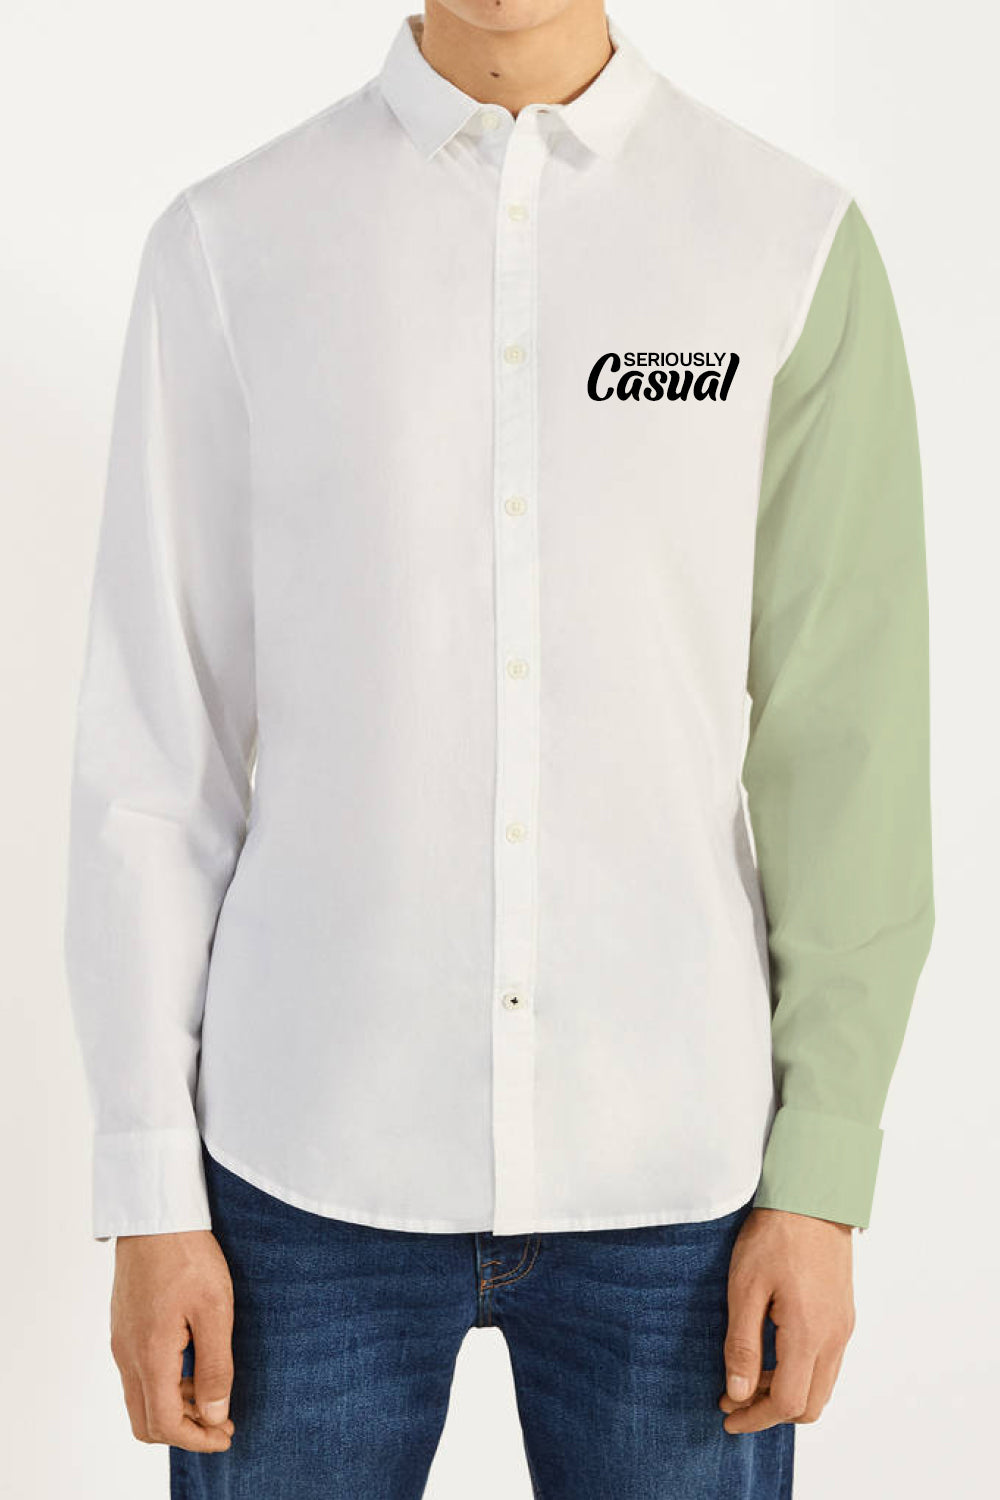 Seriously Casual White and Green Full Sleeve Shirt